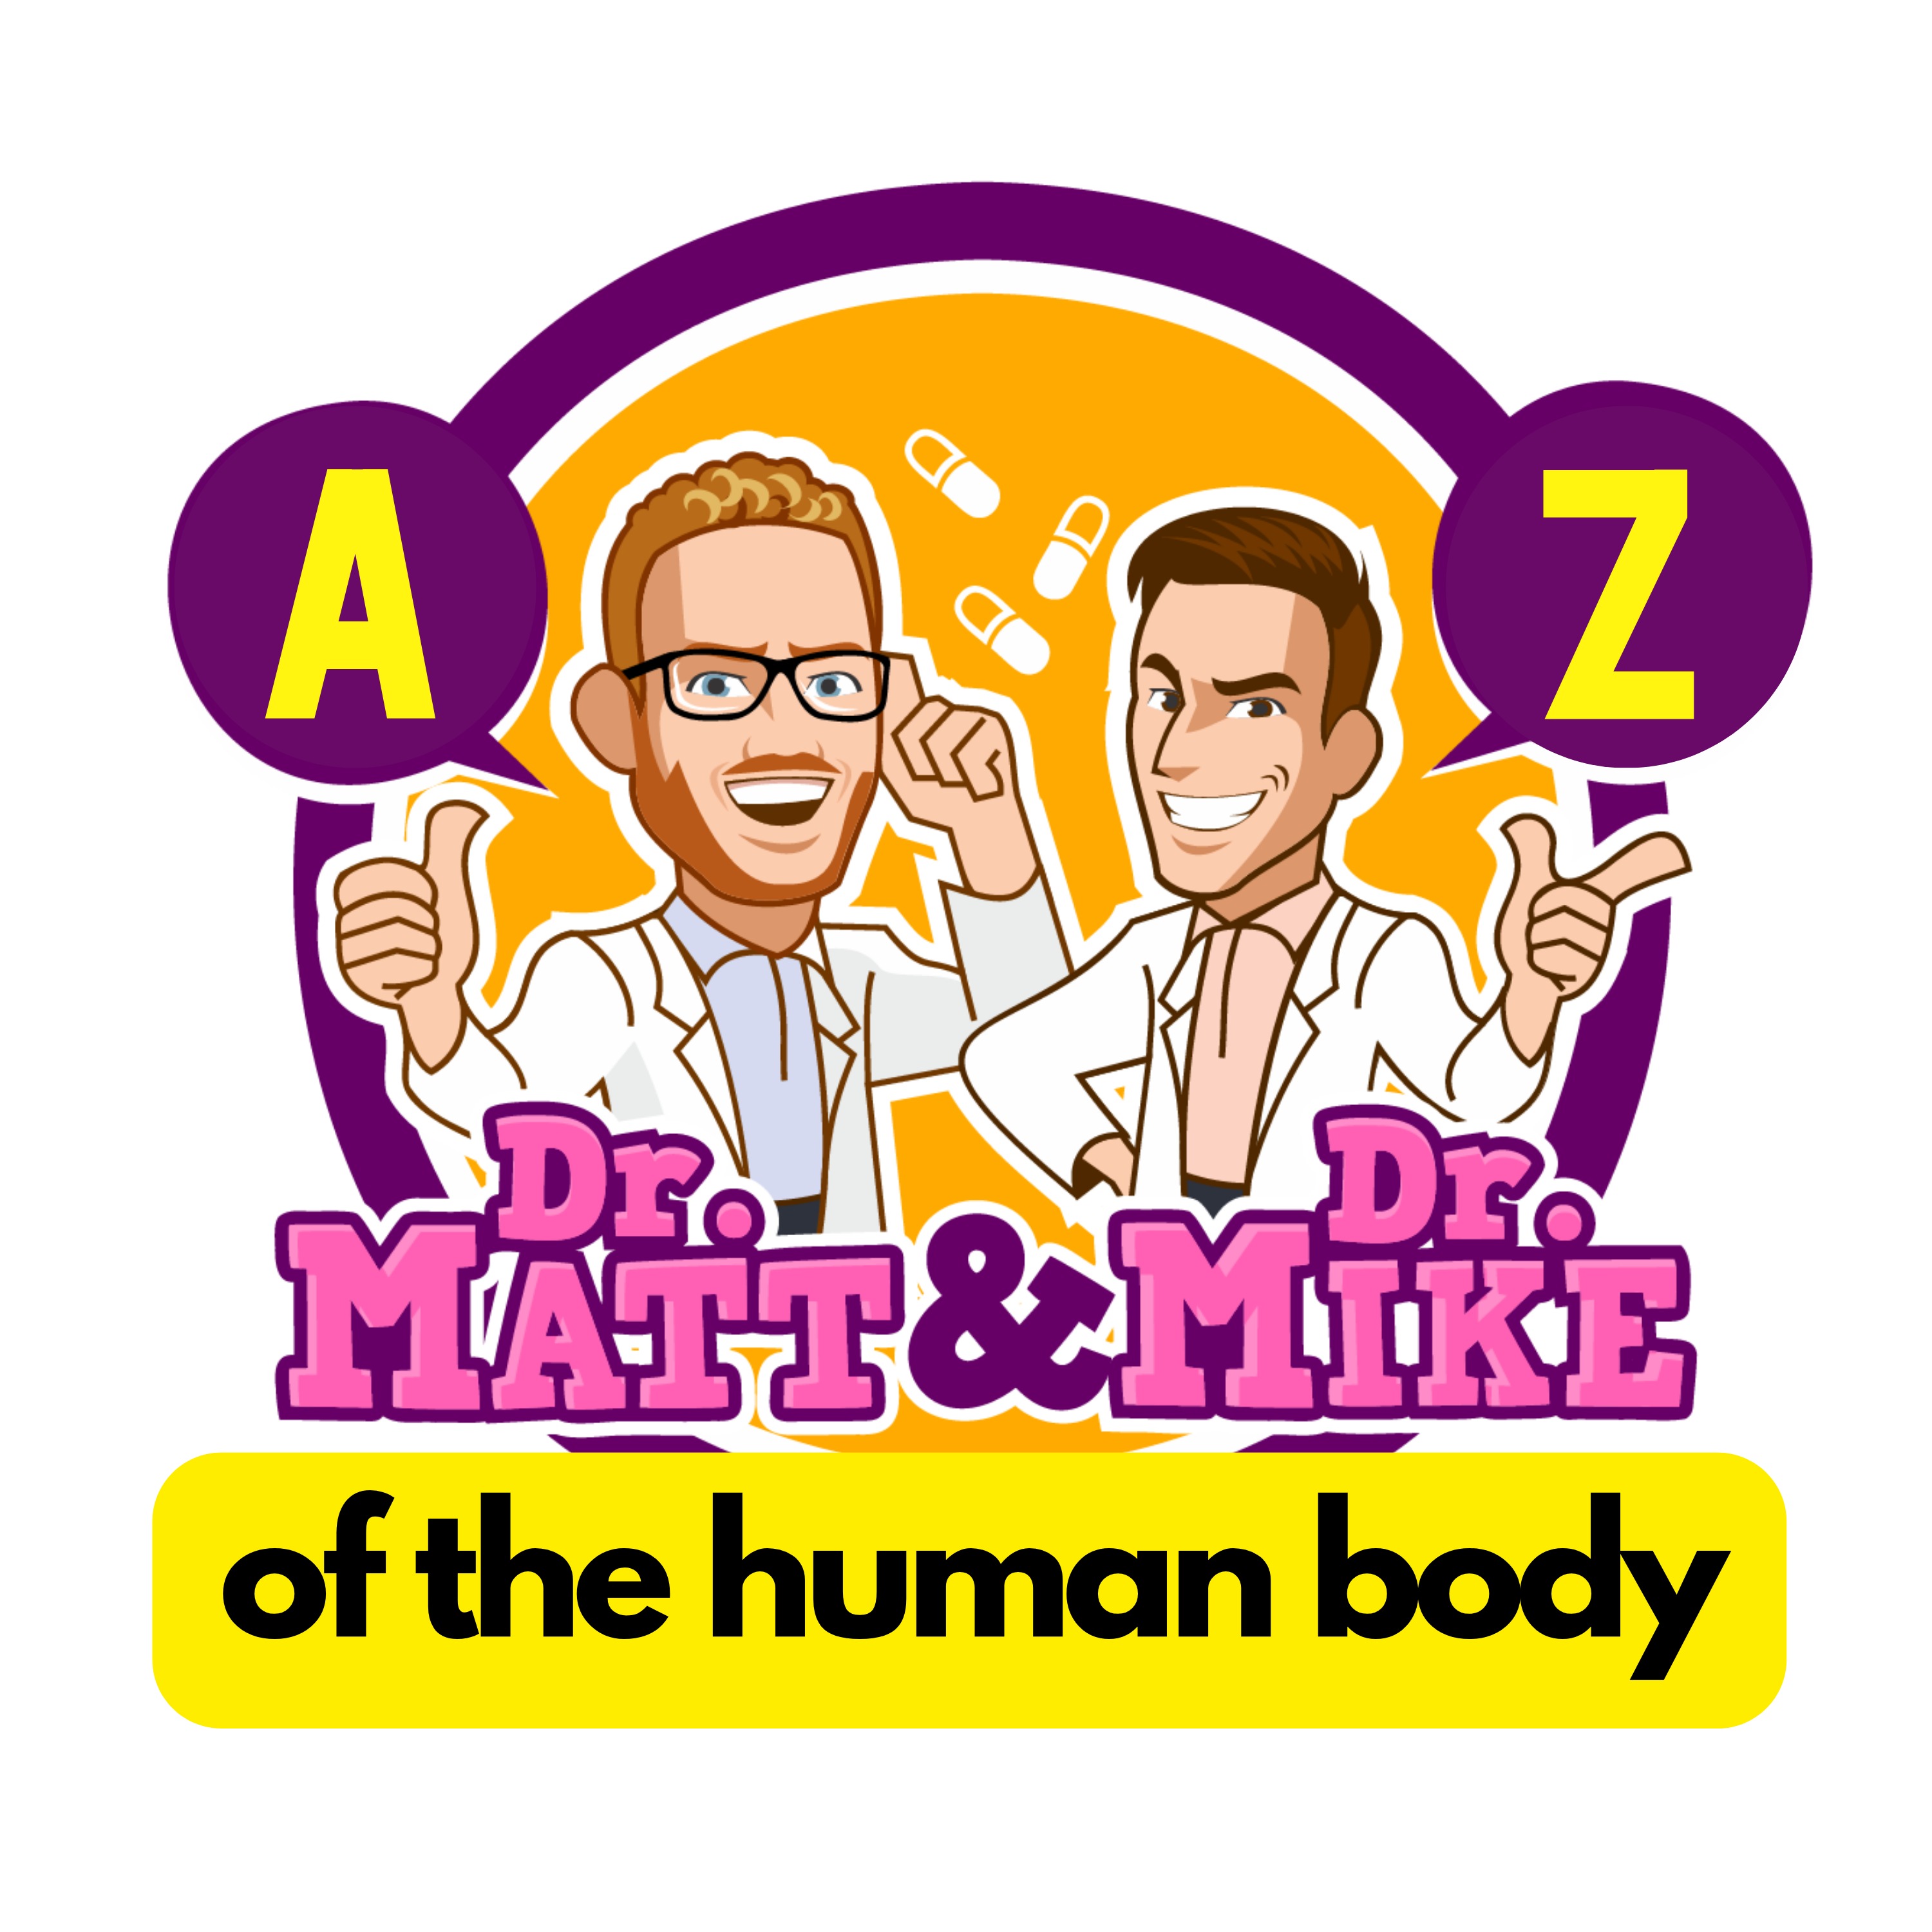 Anions | A-Z of the Human Body